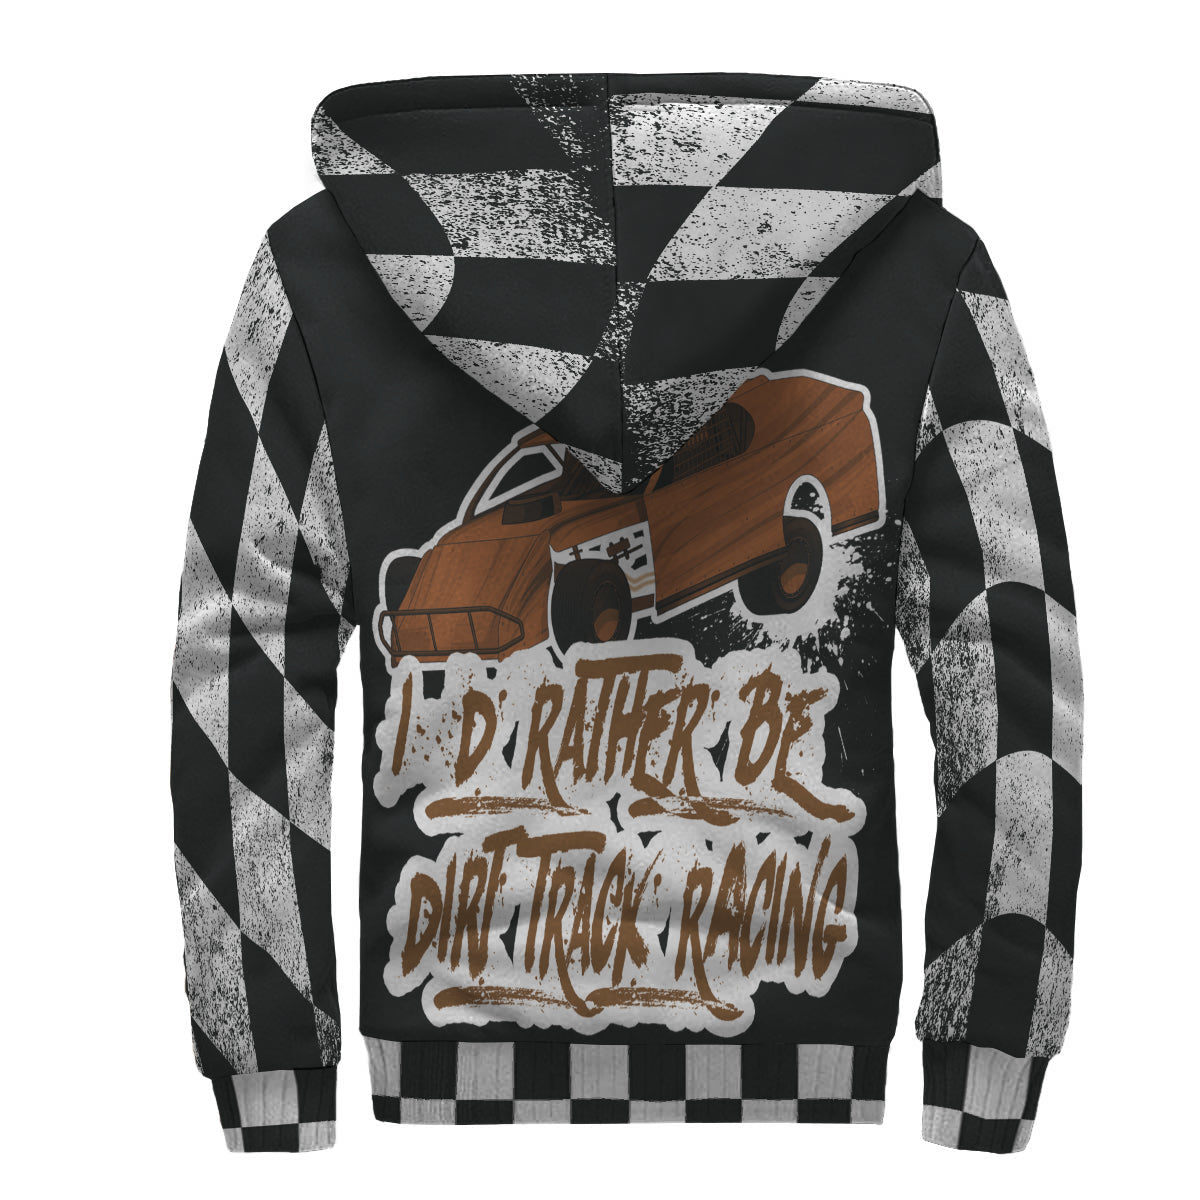 dirt track racing modified  jacket